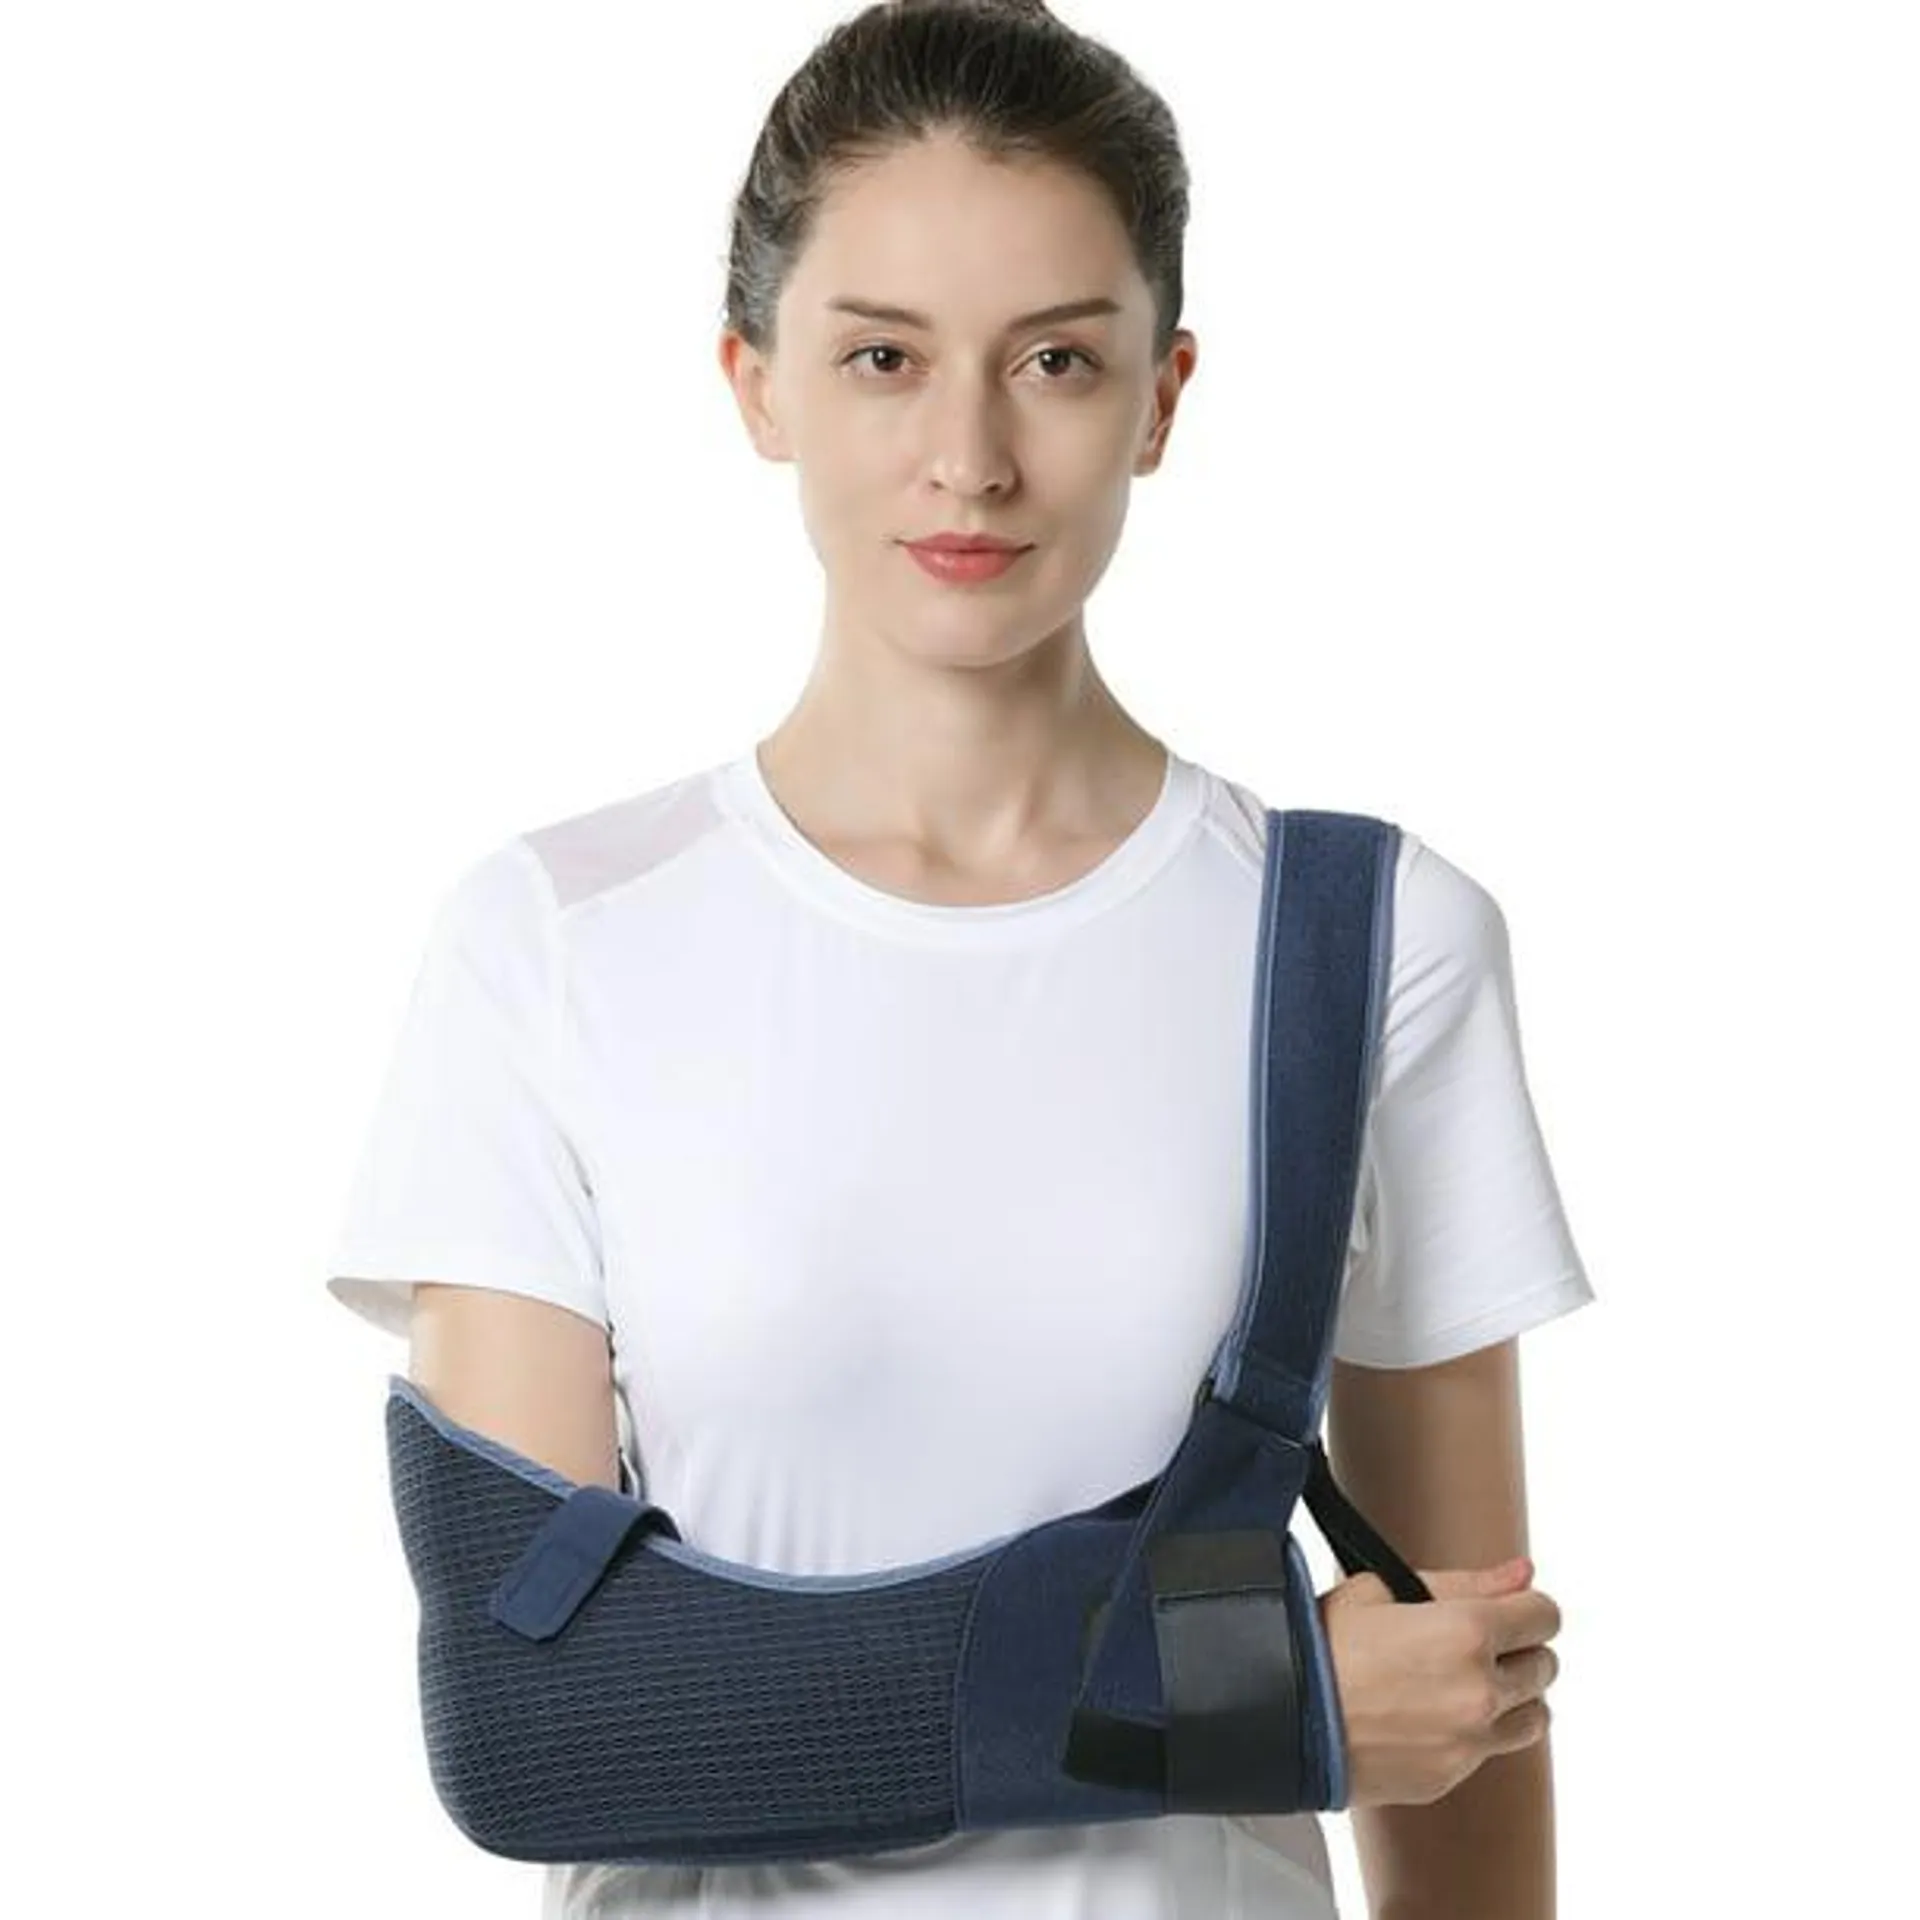 VELPEAU Arm Sling Shoulder Immobilizer - Rotator Cuff Support Brace, Left or Right Arm, Unisex